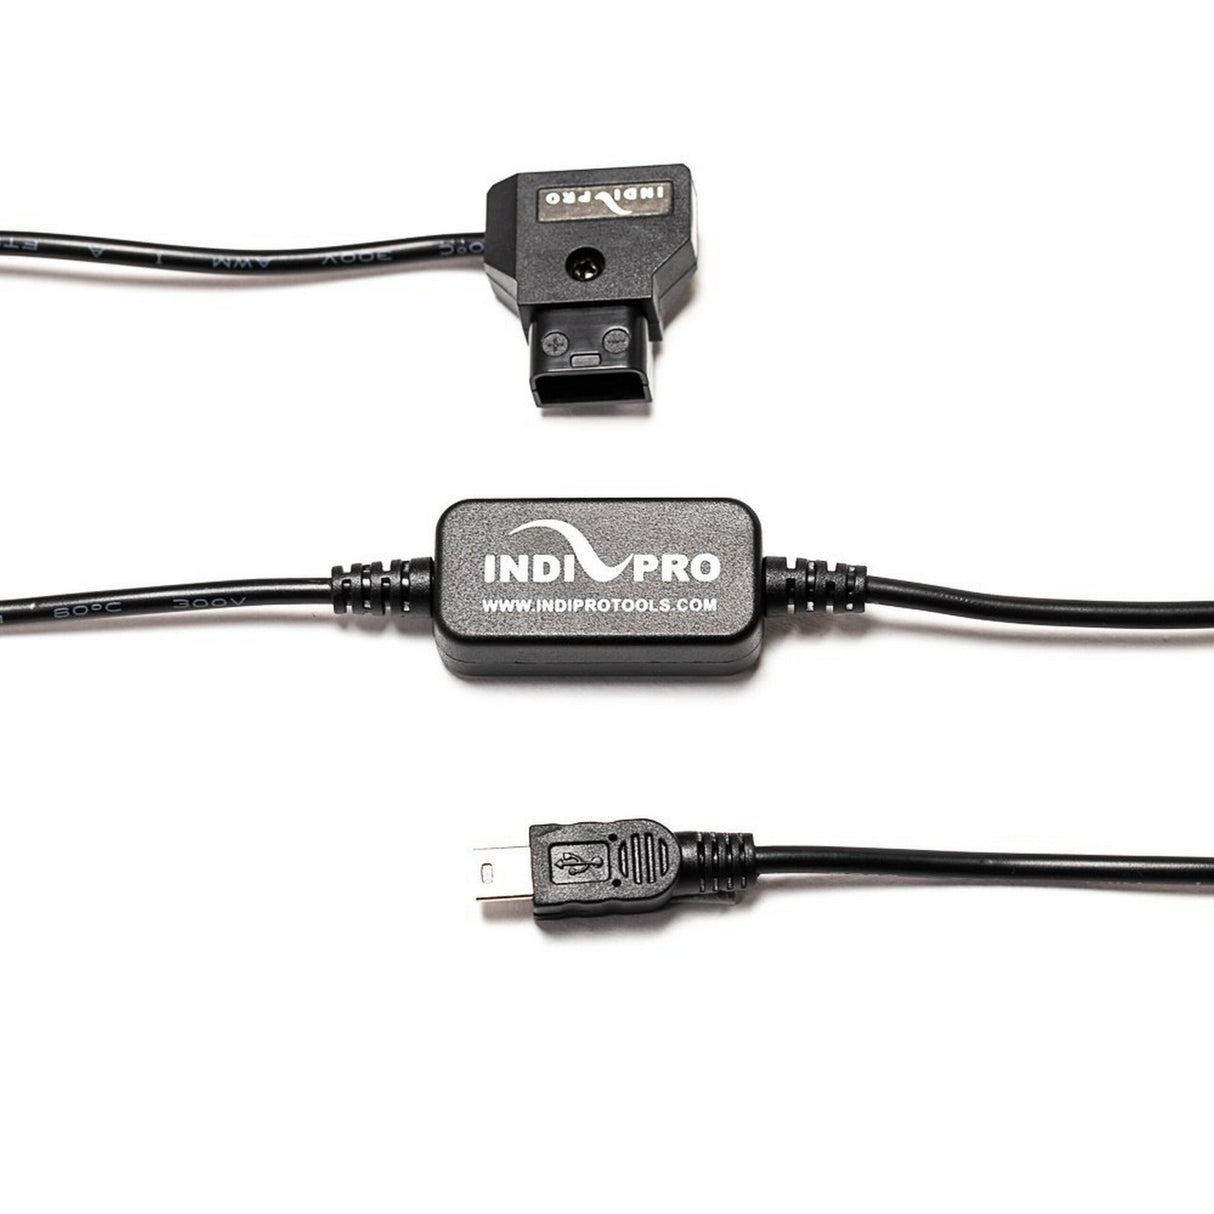 IndiPRO INDIGPCC Power Converter D-Tap to Mini USB 5V for GoPro Cameras, 30-Inch